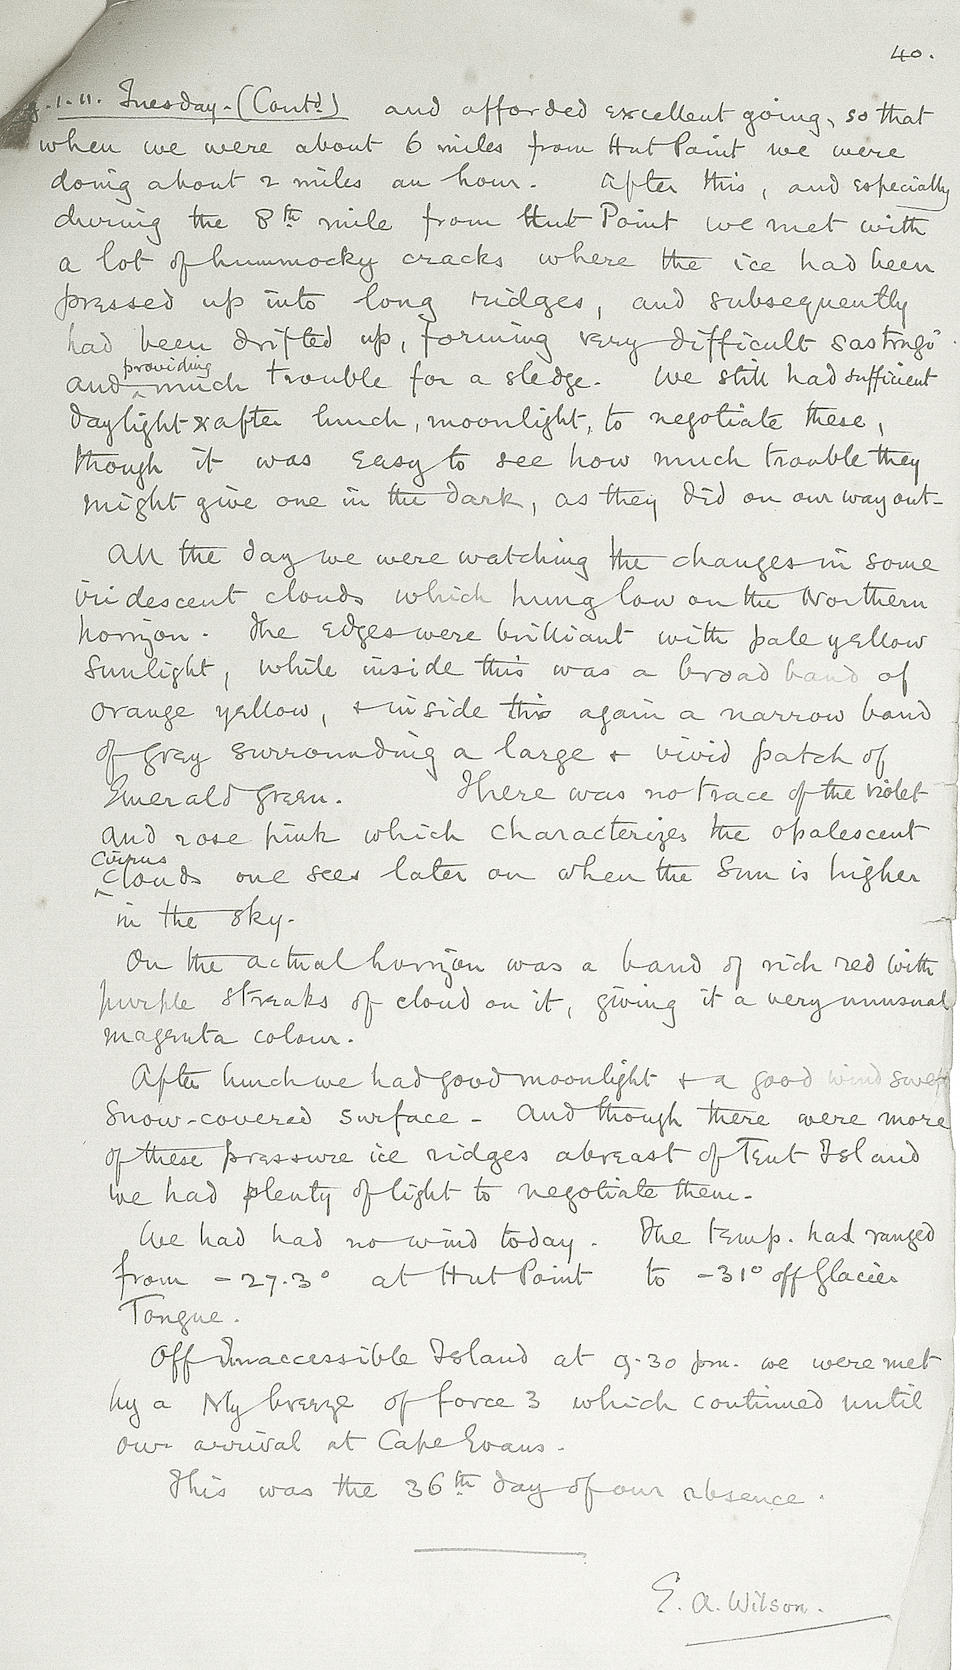 WILSON (EDWARD ADRIAN) Edward Wilson's autograph manuscript of his report on the celebrated winter journey to the Emperor Penguin rookery at Cape Crozier 'General Account of Journey from Cape Evans to Cape Crozier June 27. 1911 to Aug. 1. 1911',